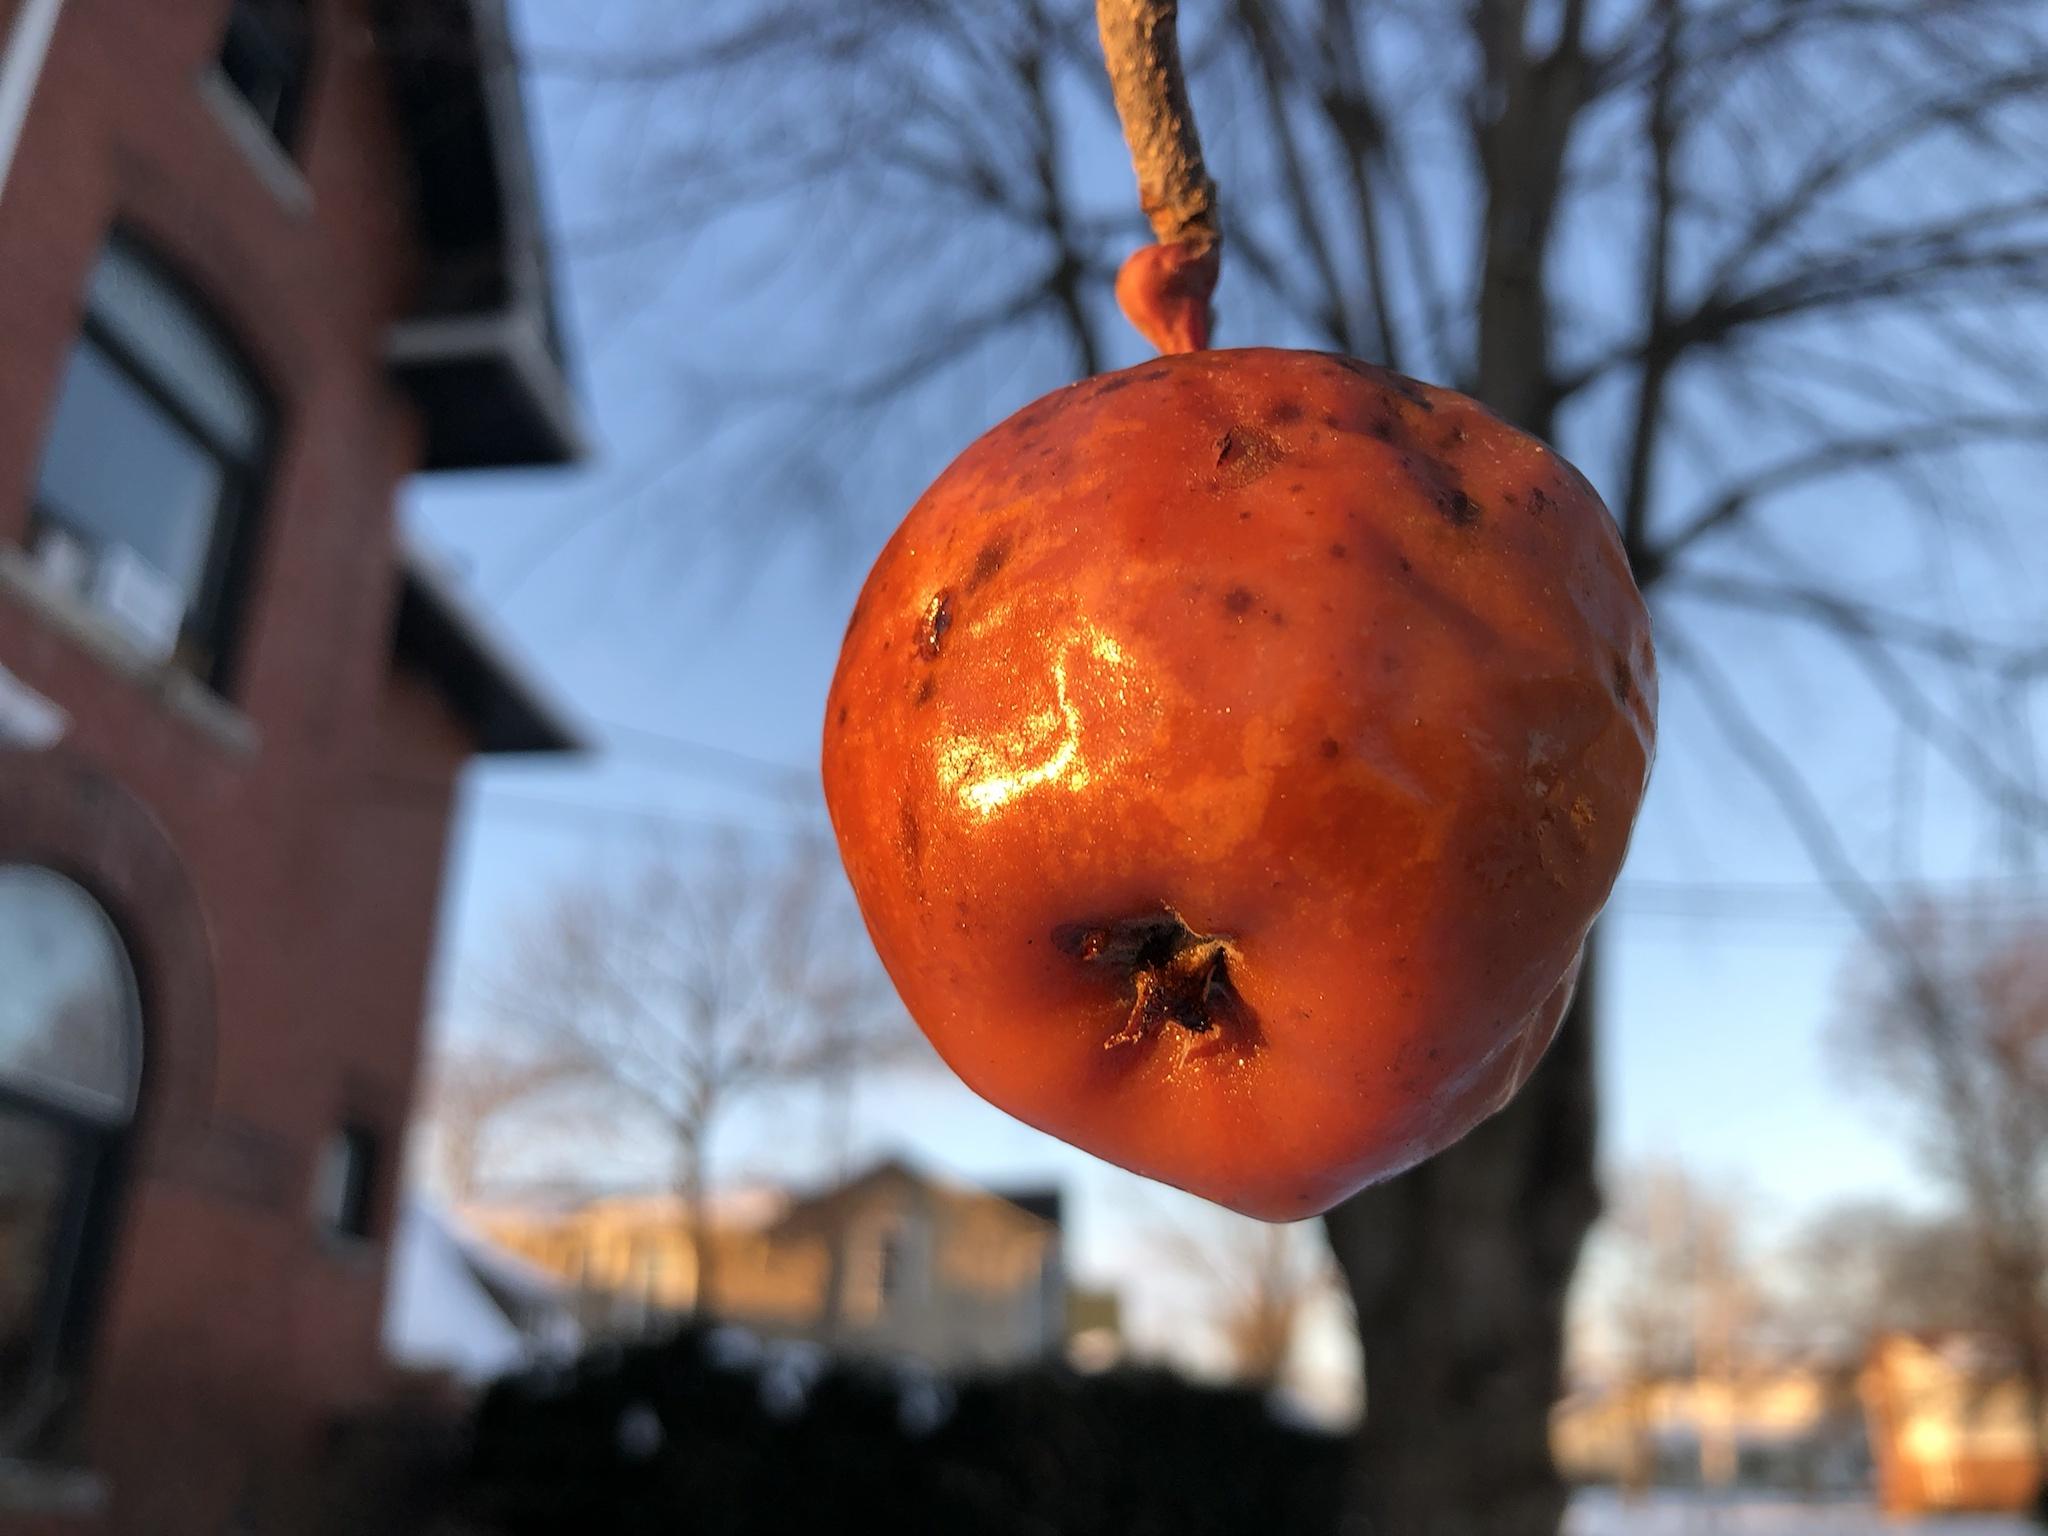 We left some apples on the tree for the native natural world. Sexy cool sunny day.